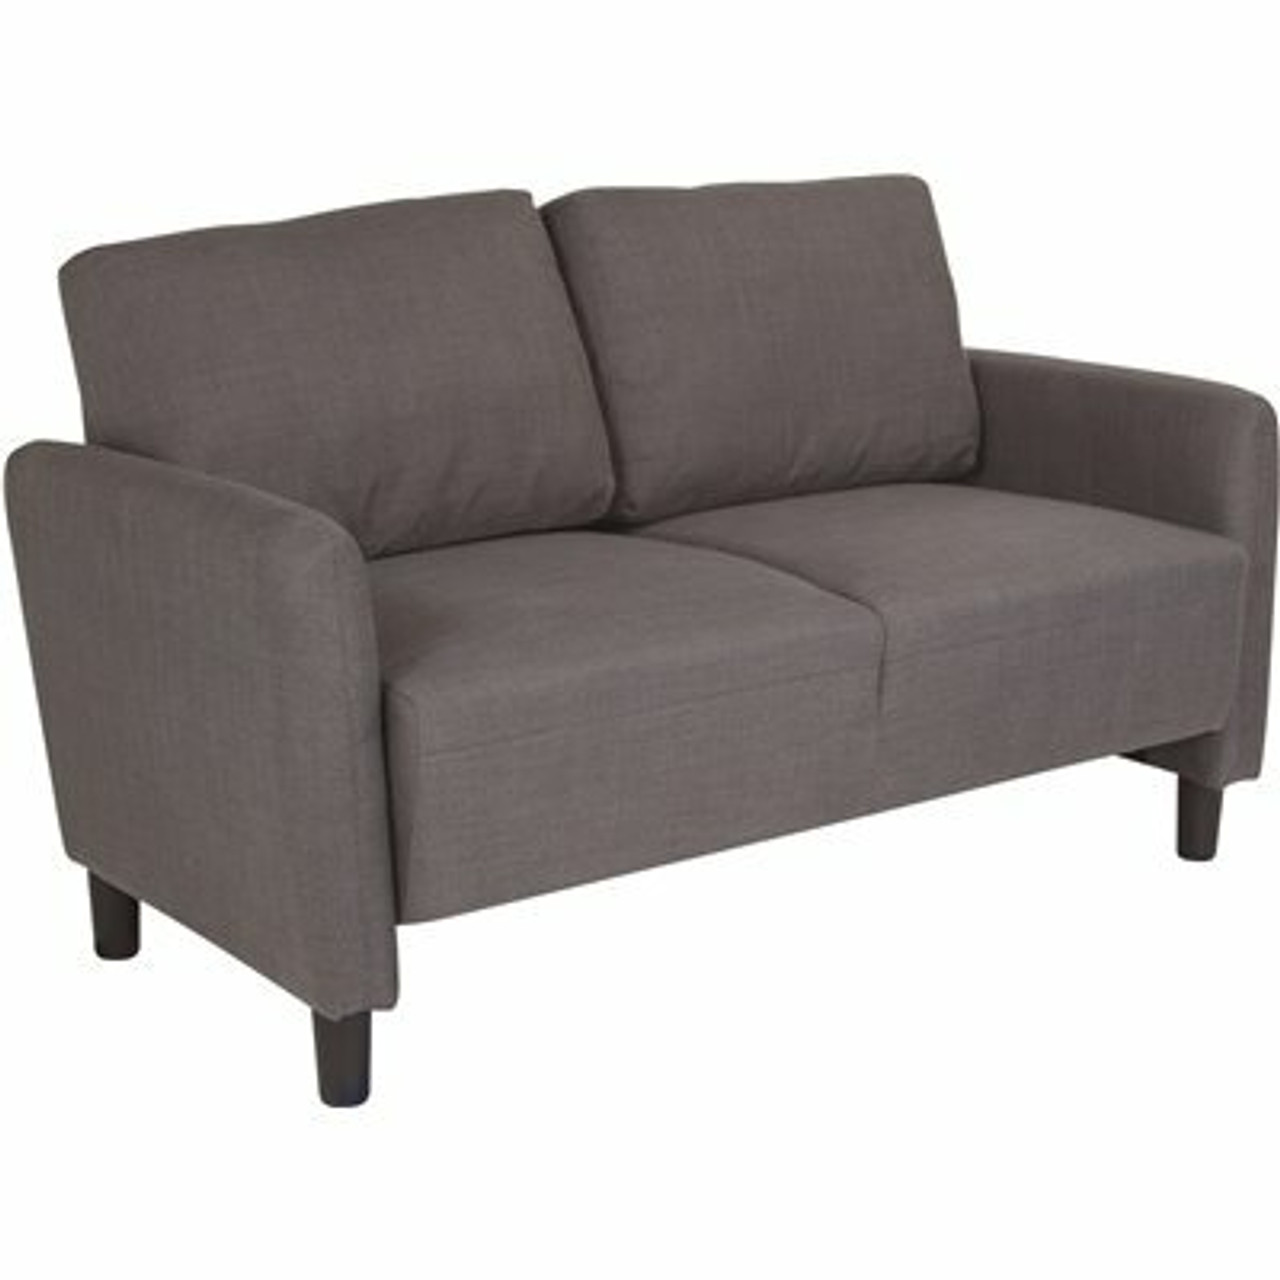 Carnegy Avenue 55.3 In. Dark Gray Cotton 2-Seater Loveseat With Square Arms - 308707477